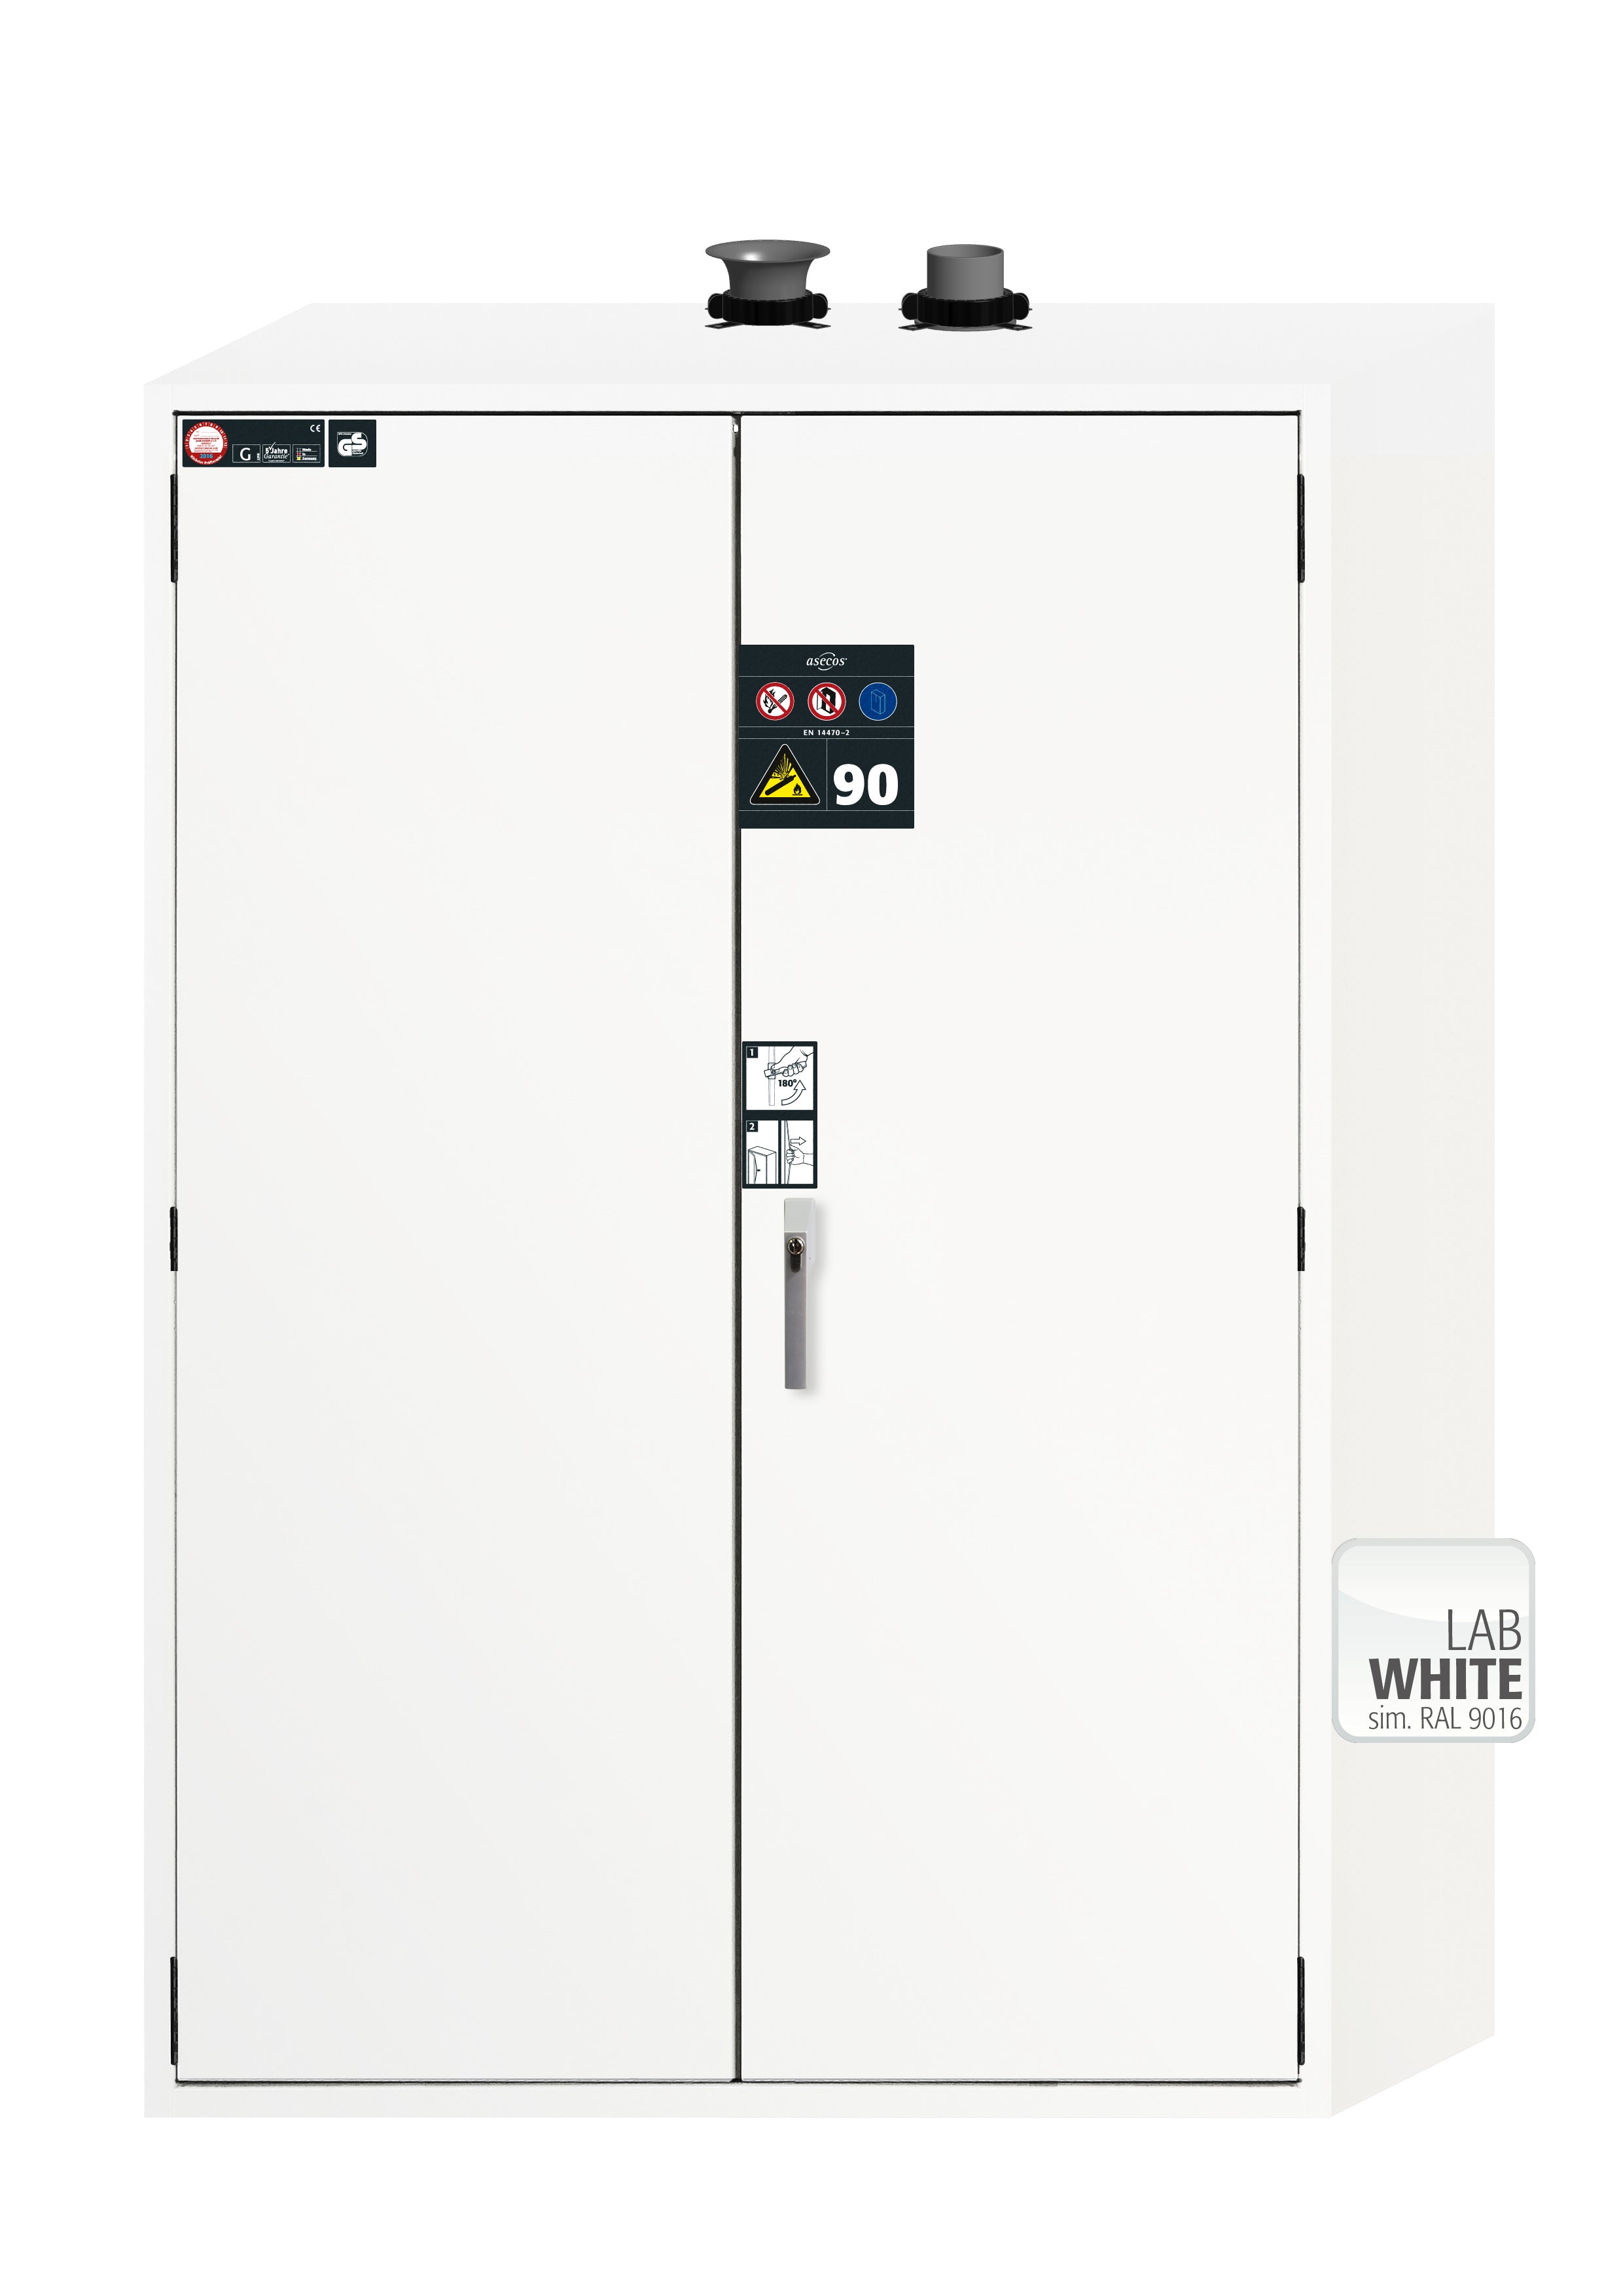 Type 90 compressed gas bottle cabinet G-ULTIMATE-90 model G90.205.140 in laboratory white (similar to RAL 9016) with for 4x compressed gas bottles of 50 liters each